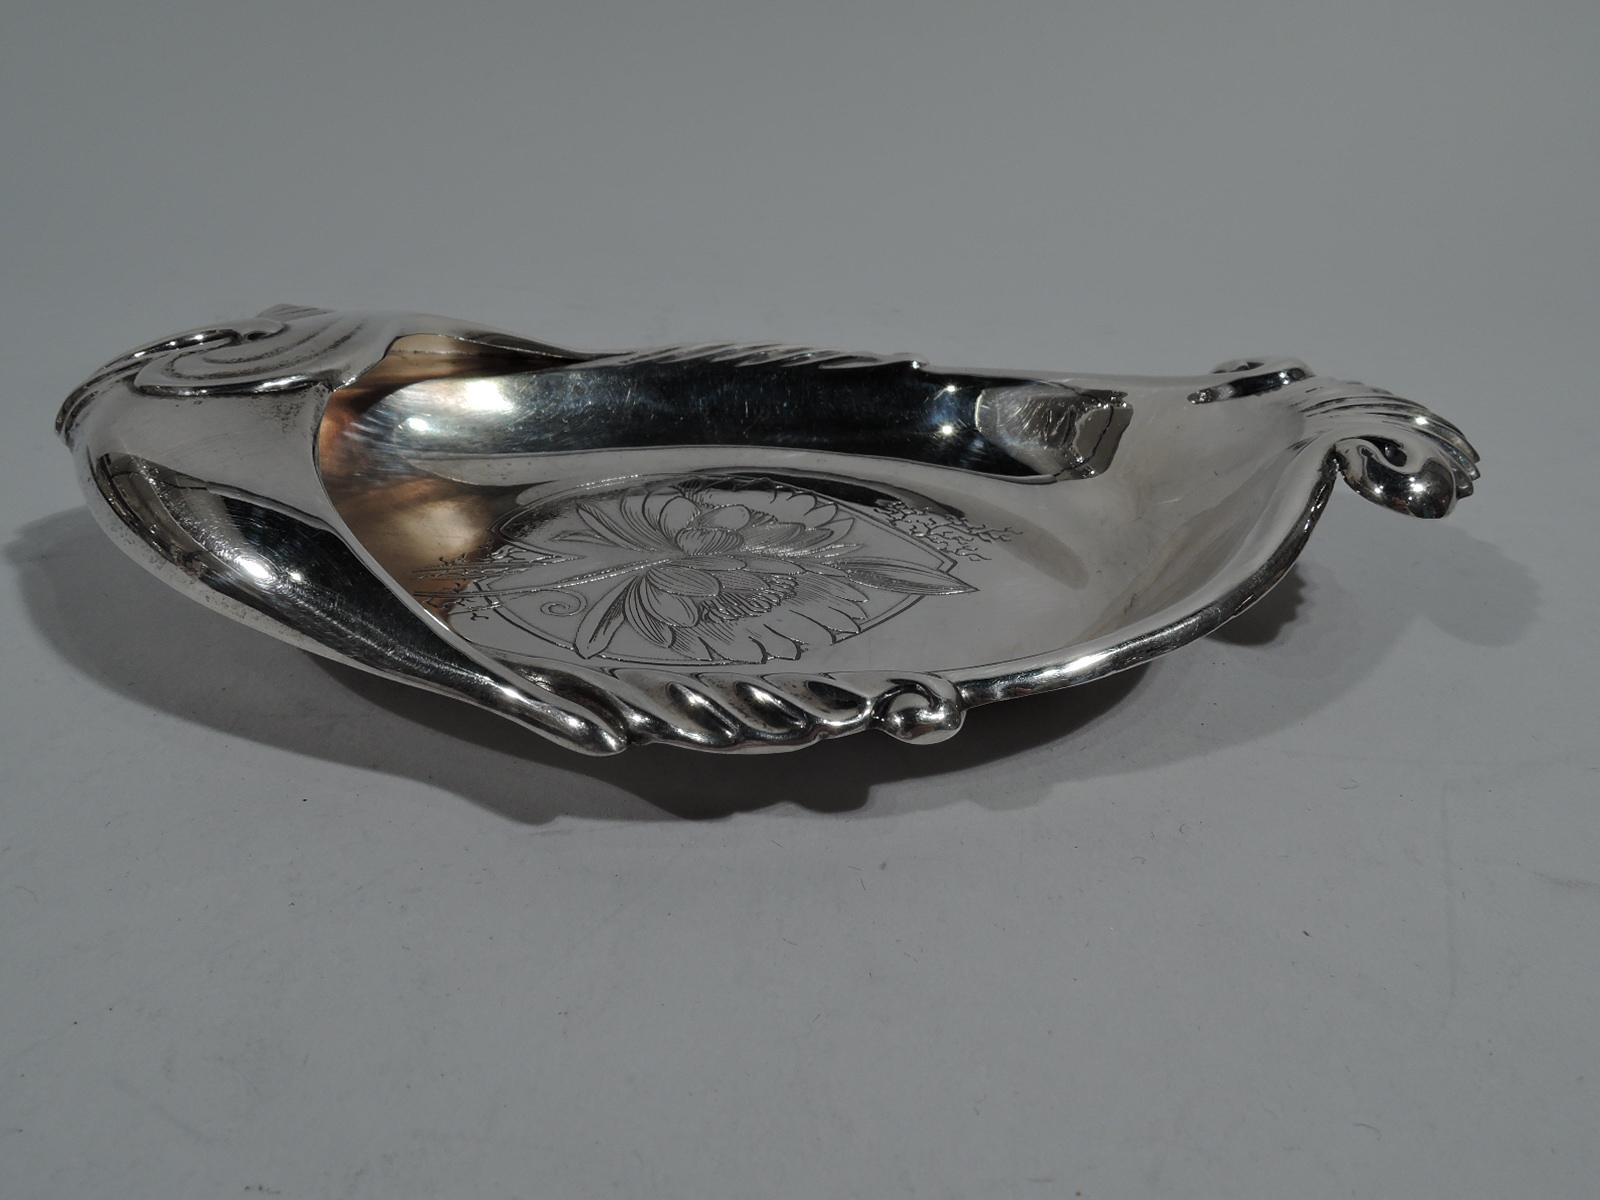 Japonisme American Aesthetic Japonesque Sterling Silver Fish Dish by Whiting